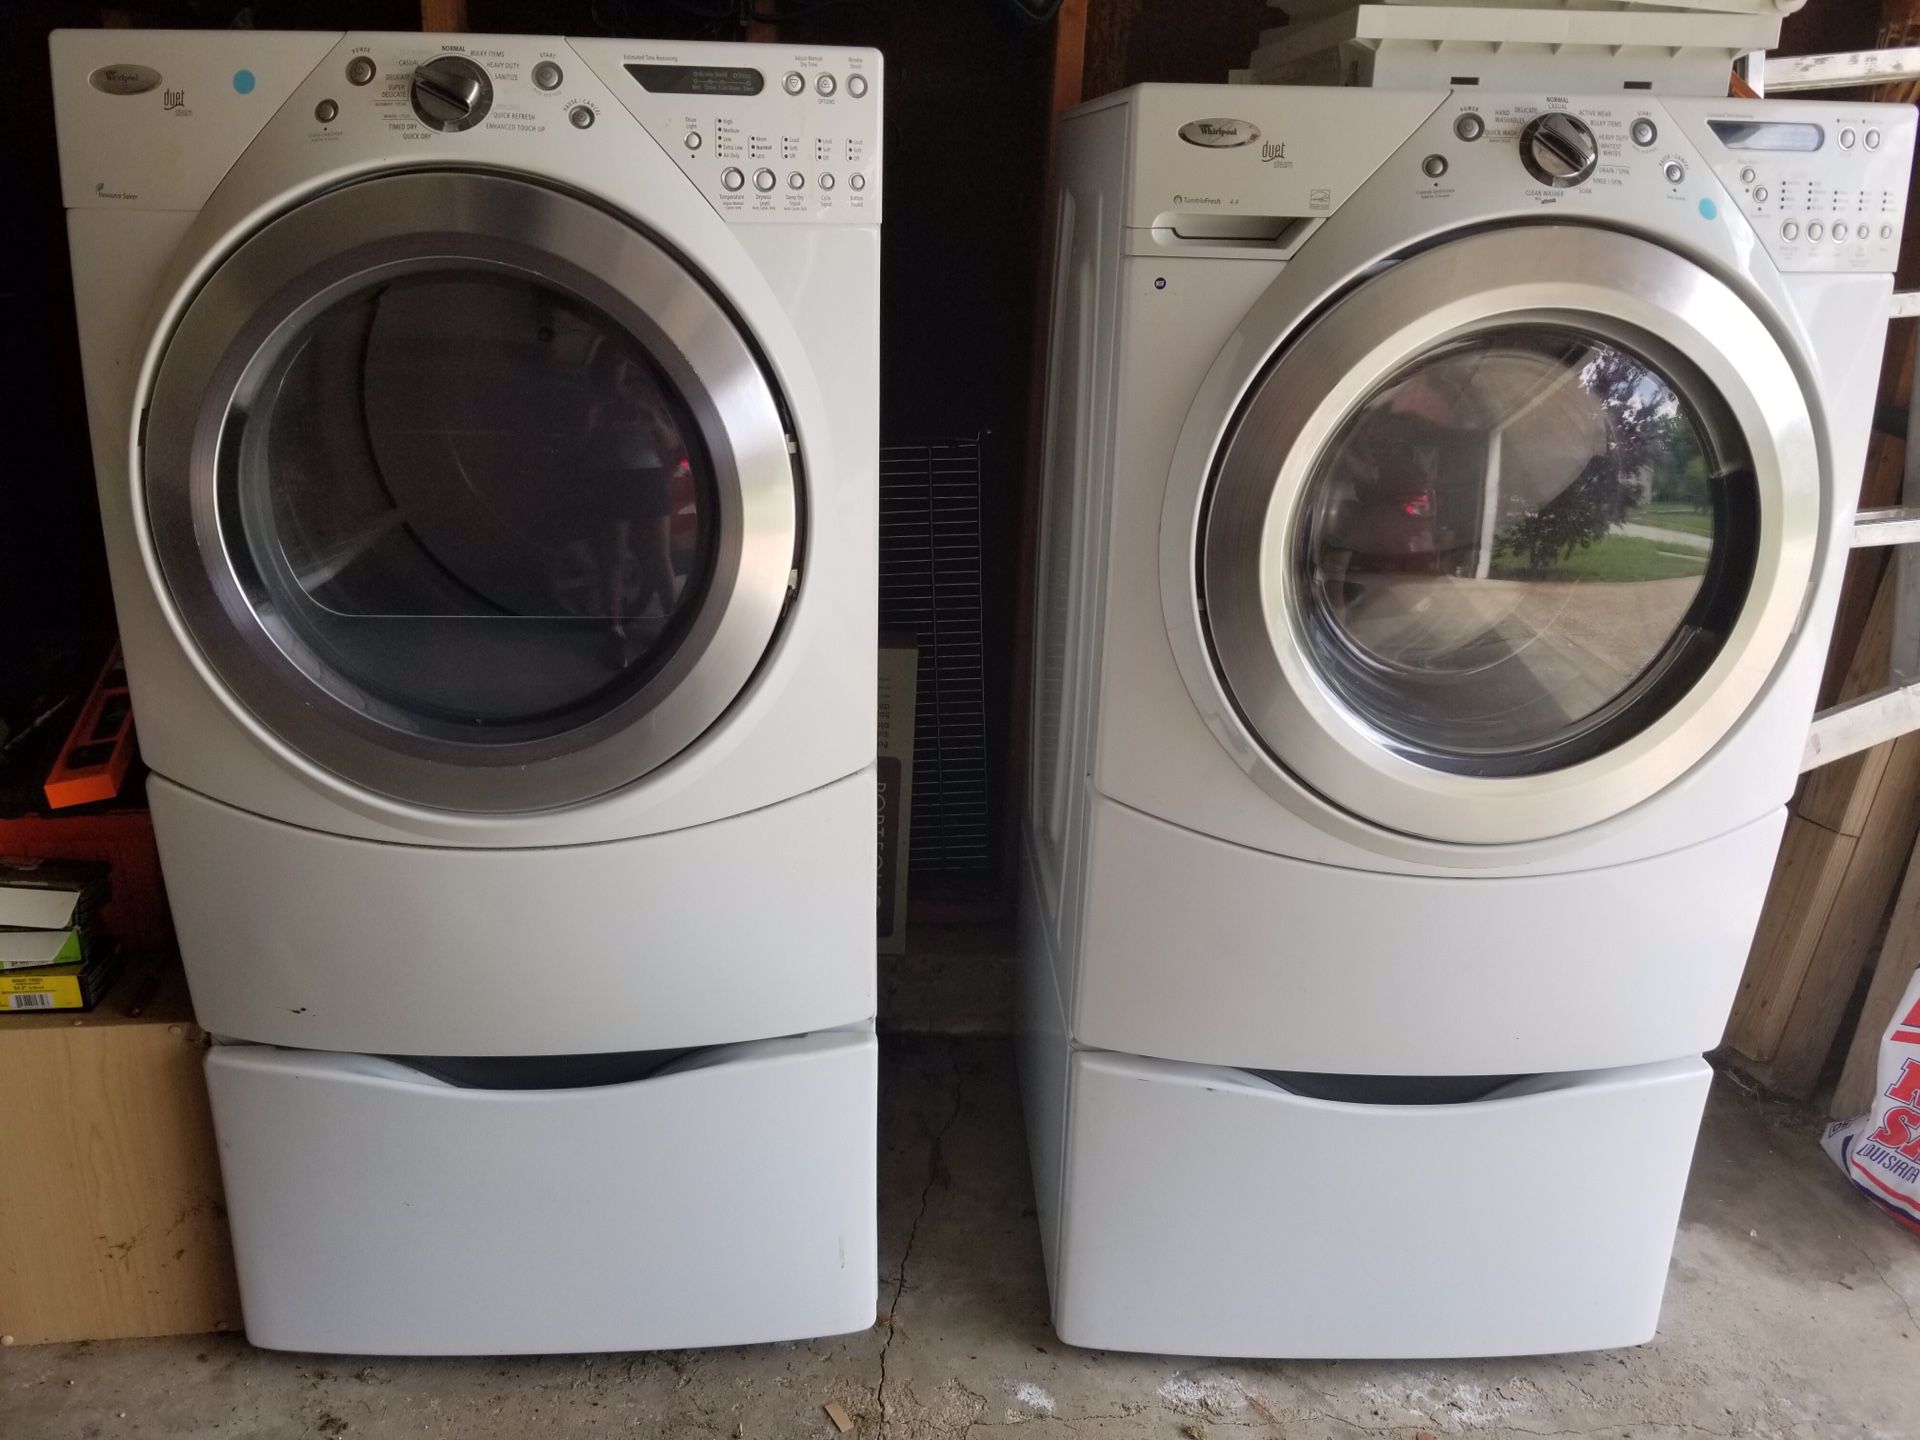 Whirlpool Duet Washer and Dryer set with pedestals